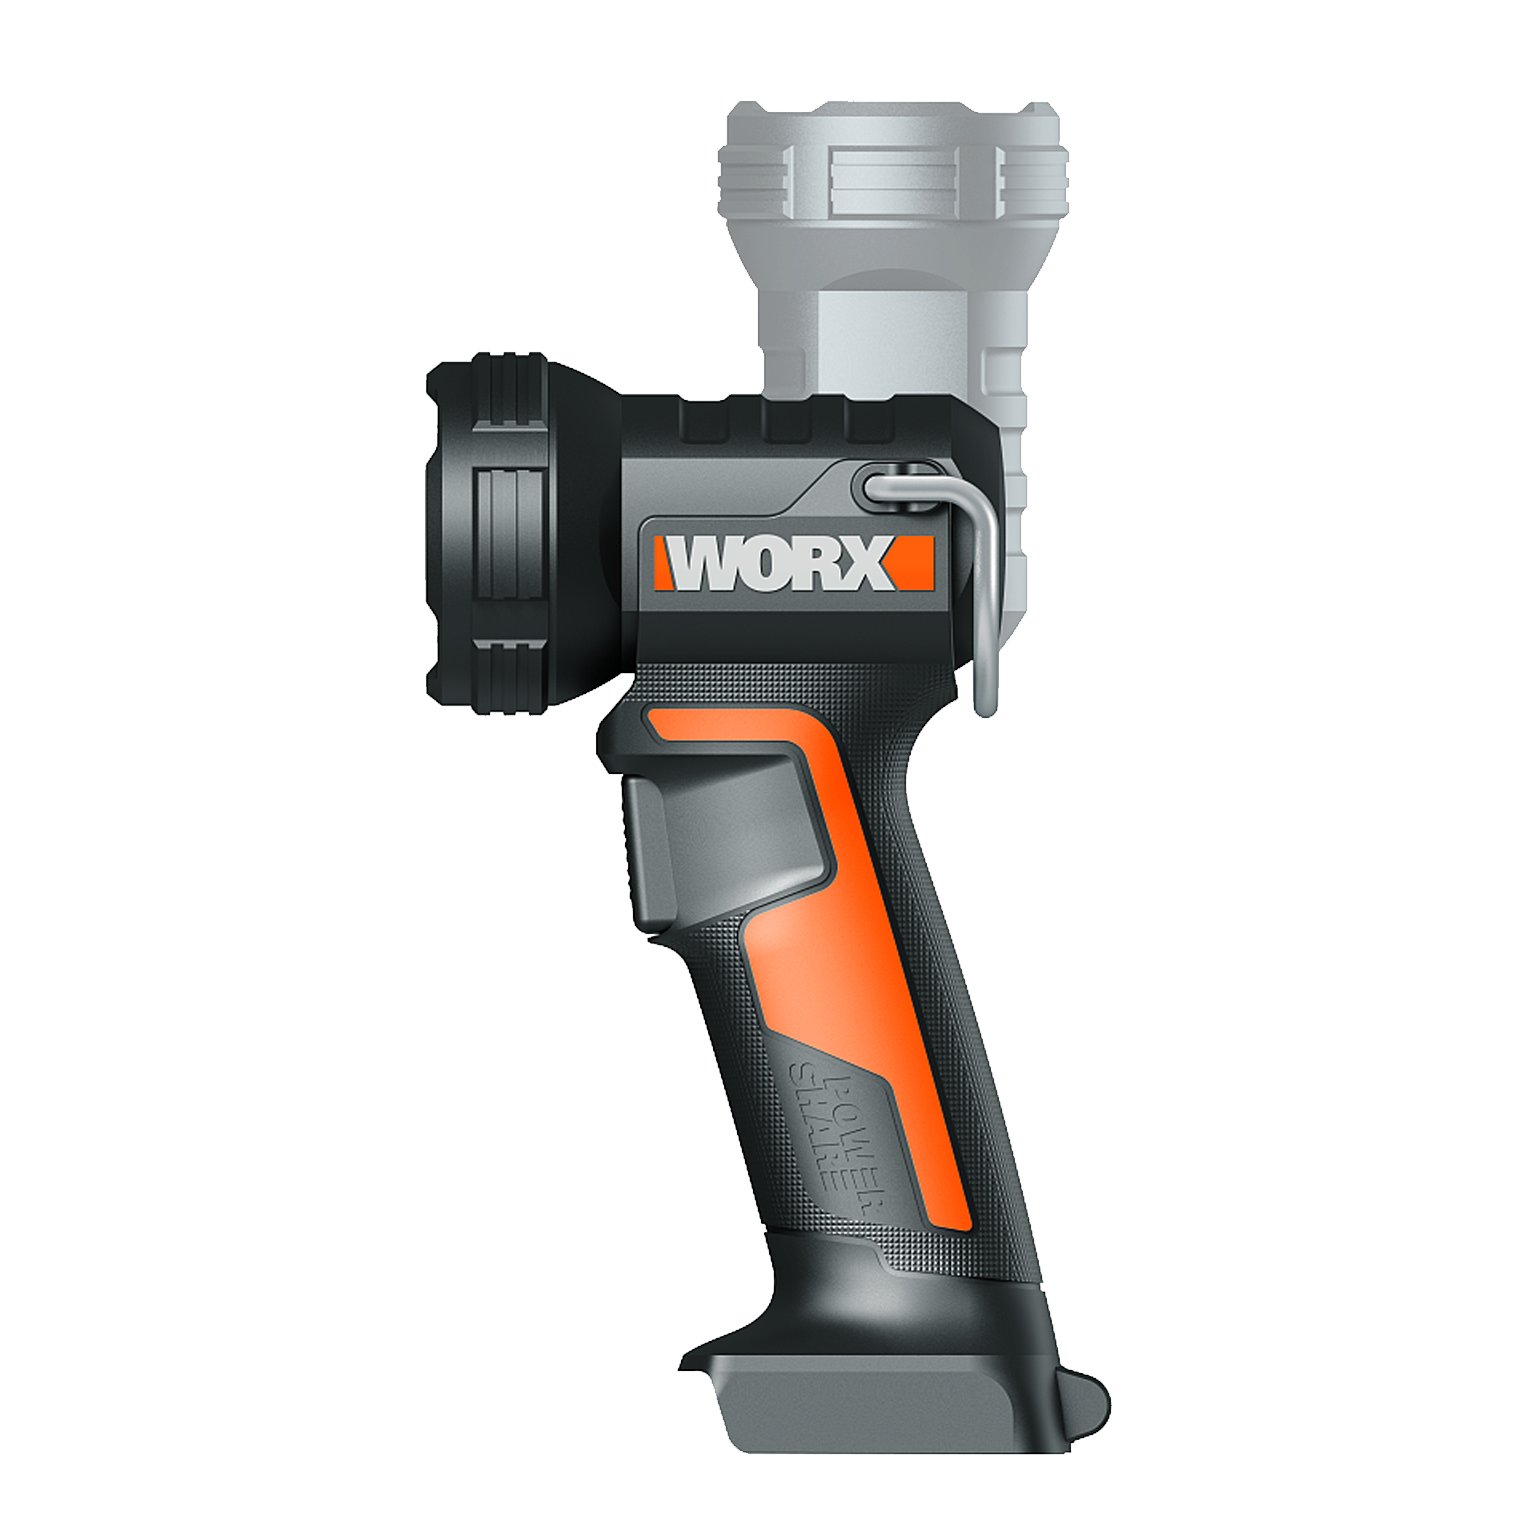 WORX 20V Cordless LED Torch Skin (POWERSHARE Battery Charger not